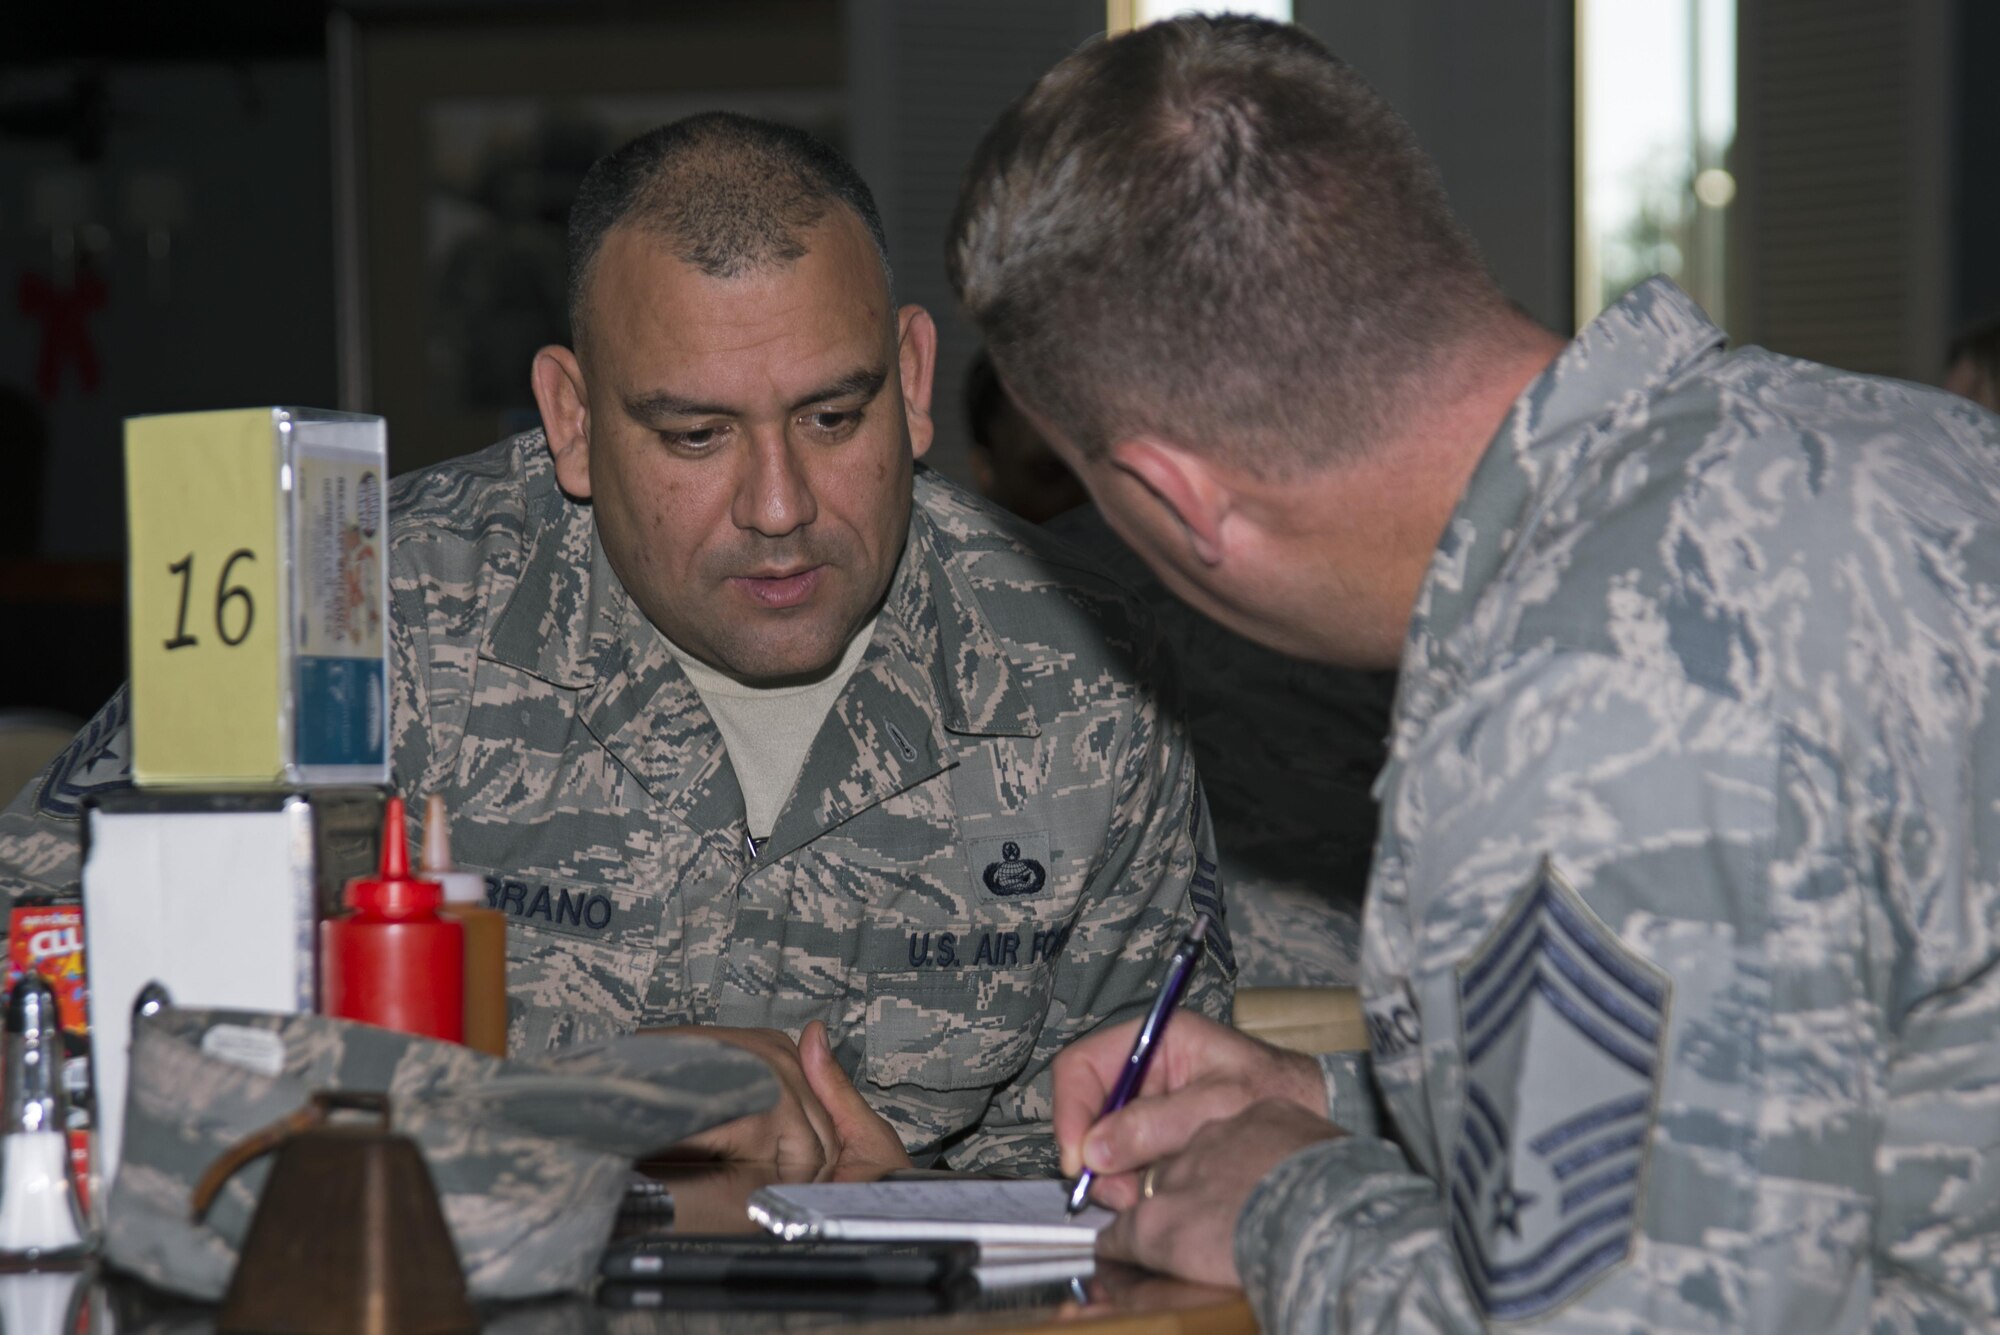 U.S. Air Force Senior Master Sgt. Luis Serrano, 20th Force Support Squadron superintendent, left, provides Chief Master Sgt. Steven Mullens, 20th Mission Support Group superintendent, right, his work information during a speed networking event at Shaw Air Force Base, S.C., Dec. 1, 2016. Senior NCOs attending the event collected contact information from individuals they met, creating a personal resource guide. (U.S. Air Force photo by Airman 1st Class Kathryn R.C. Reaves)